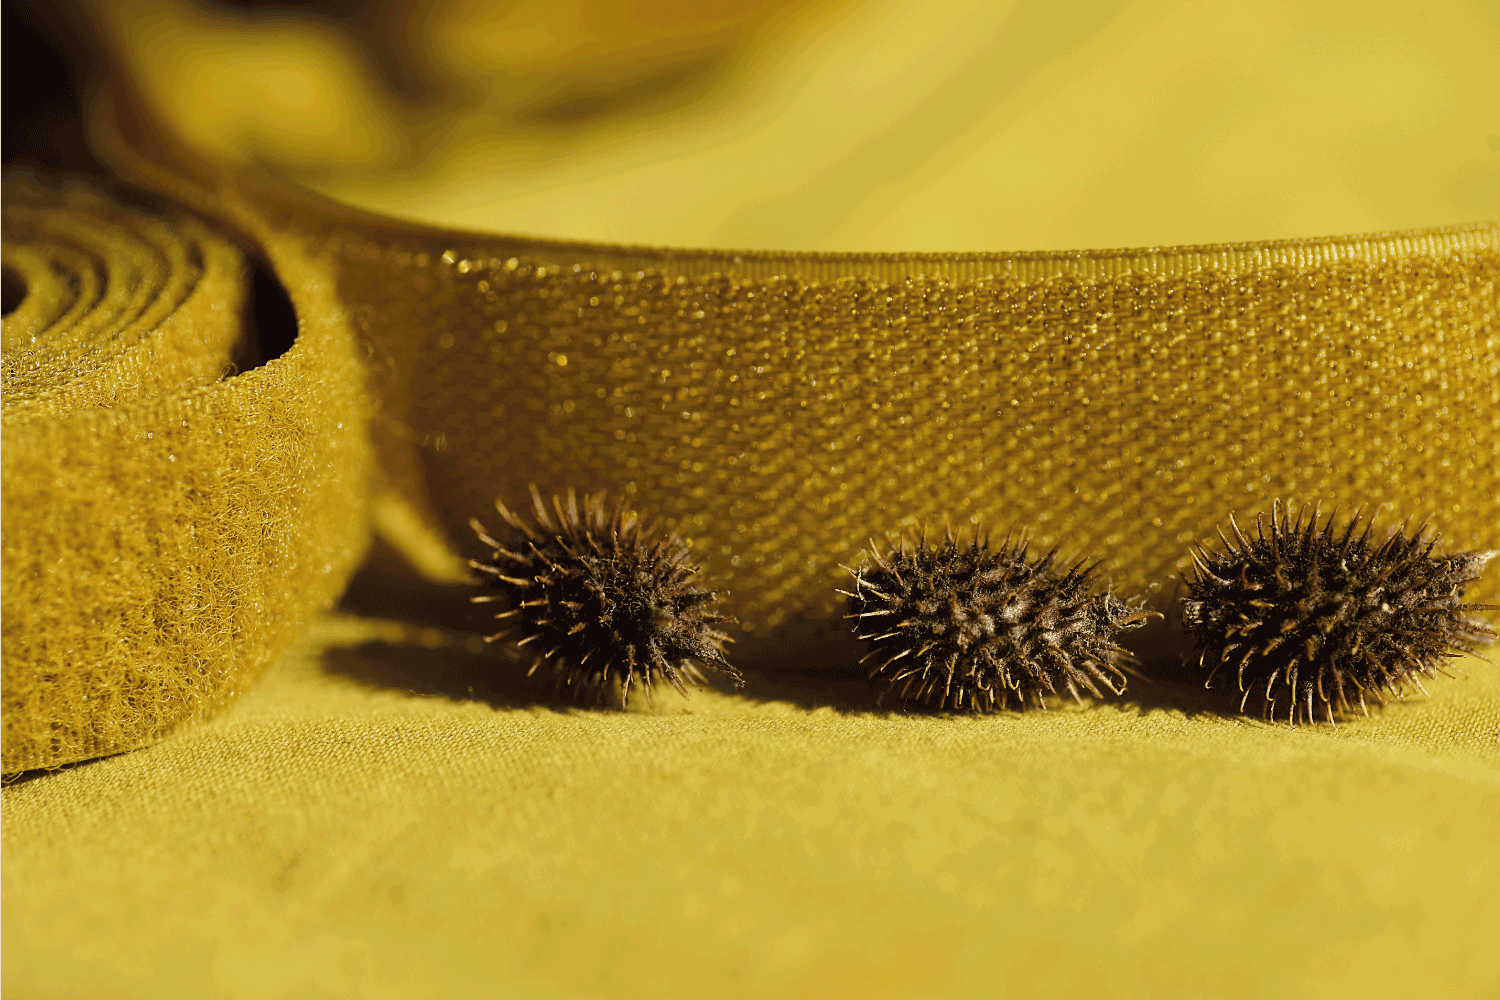 Velcro tape in a roll closeup on a yellow background next to its natural counterpart prickly burdock nuts